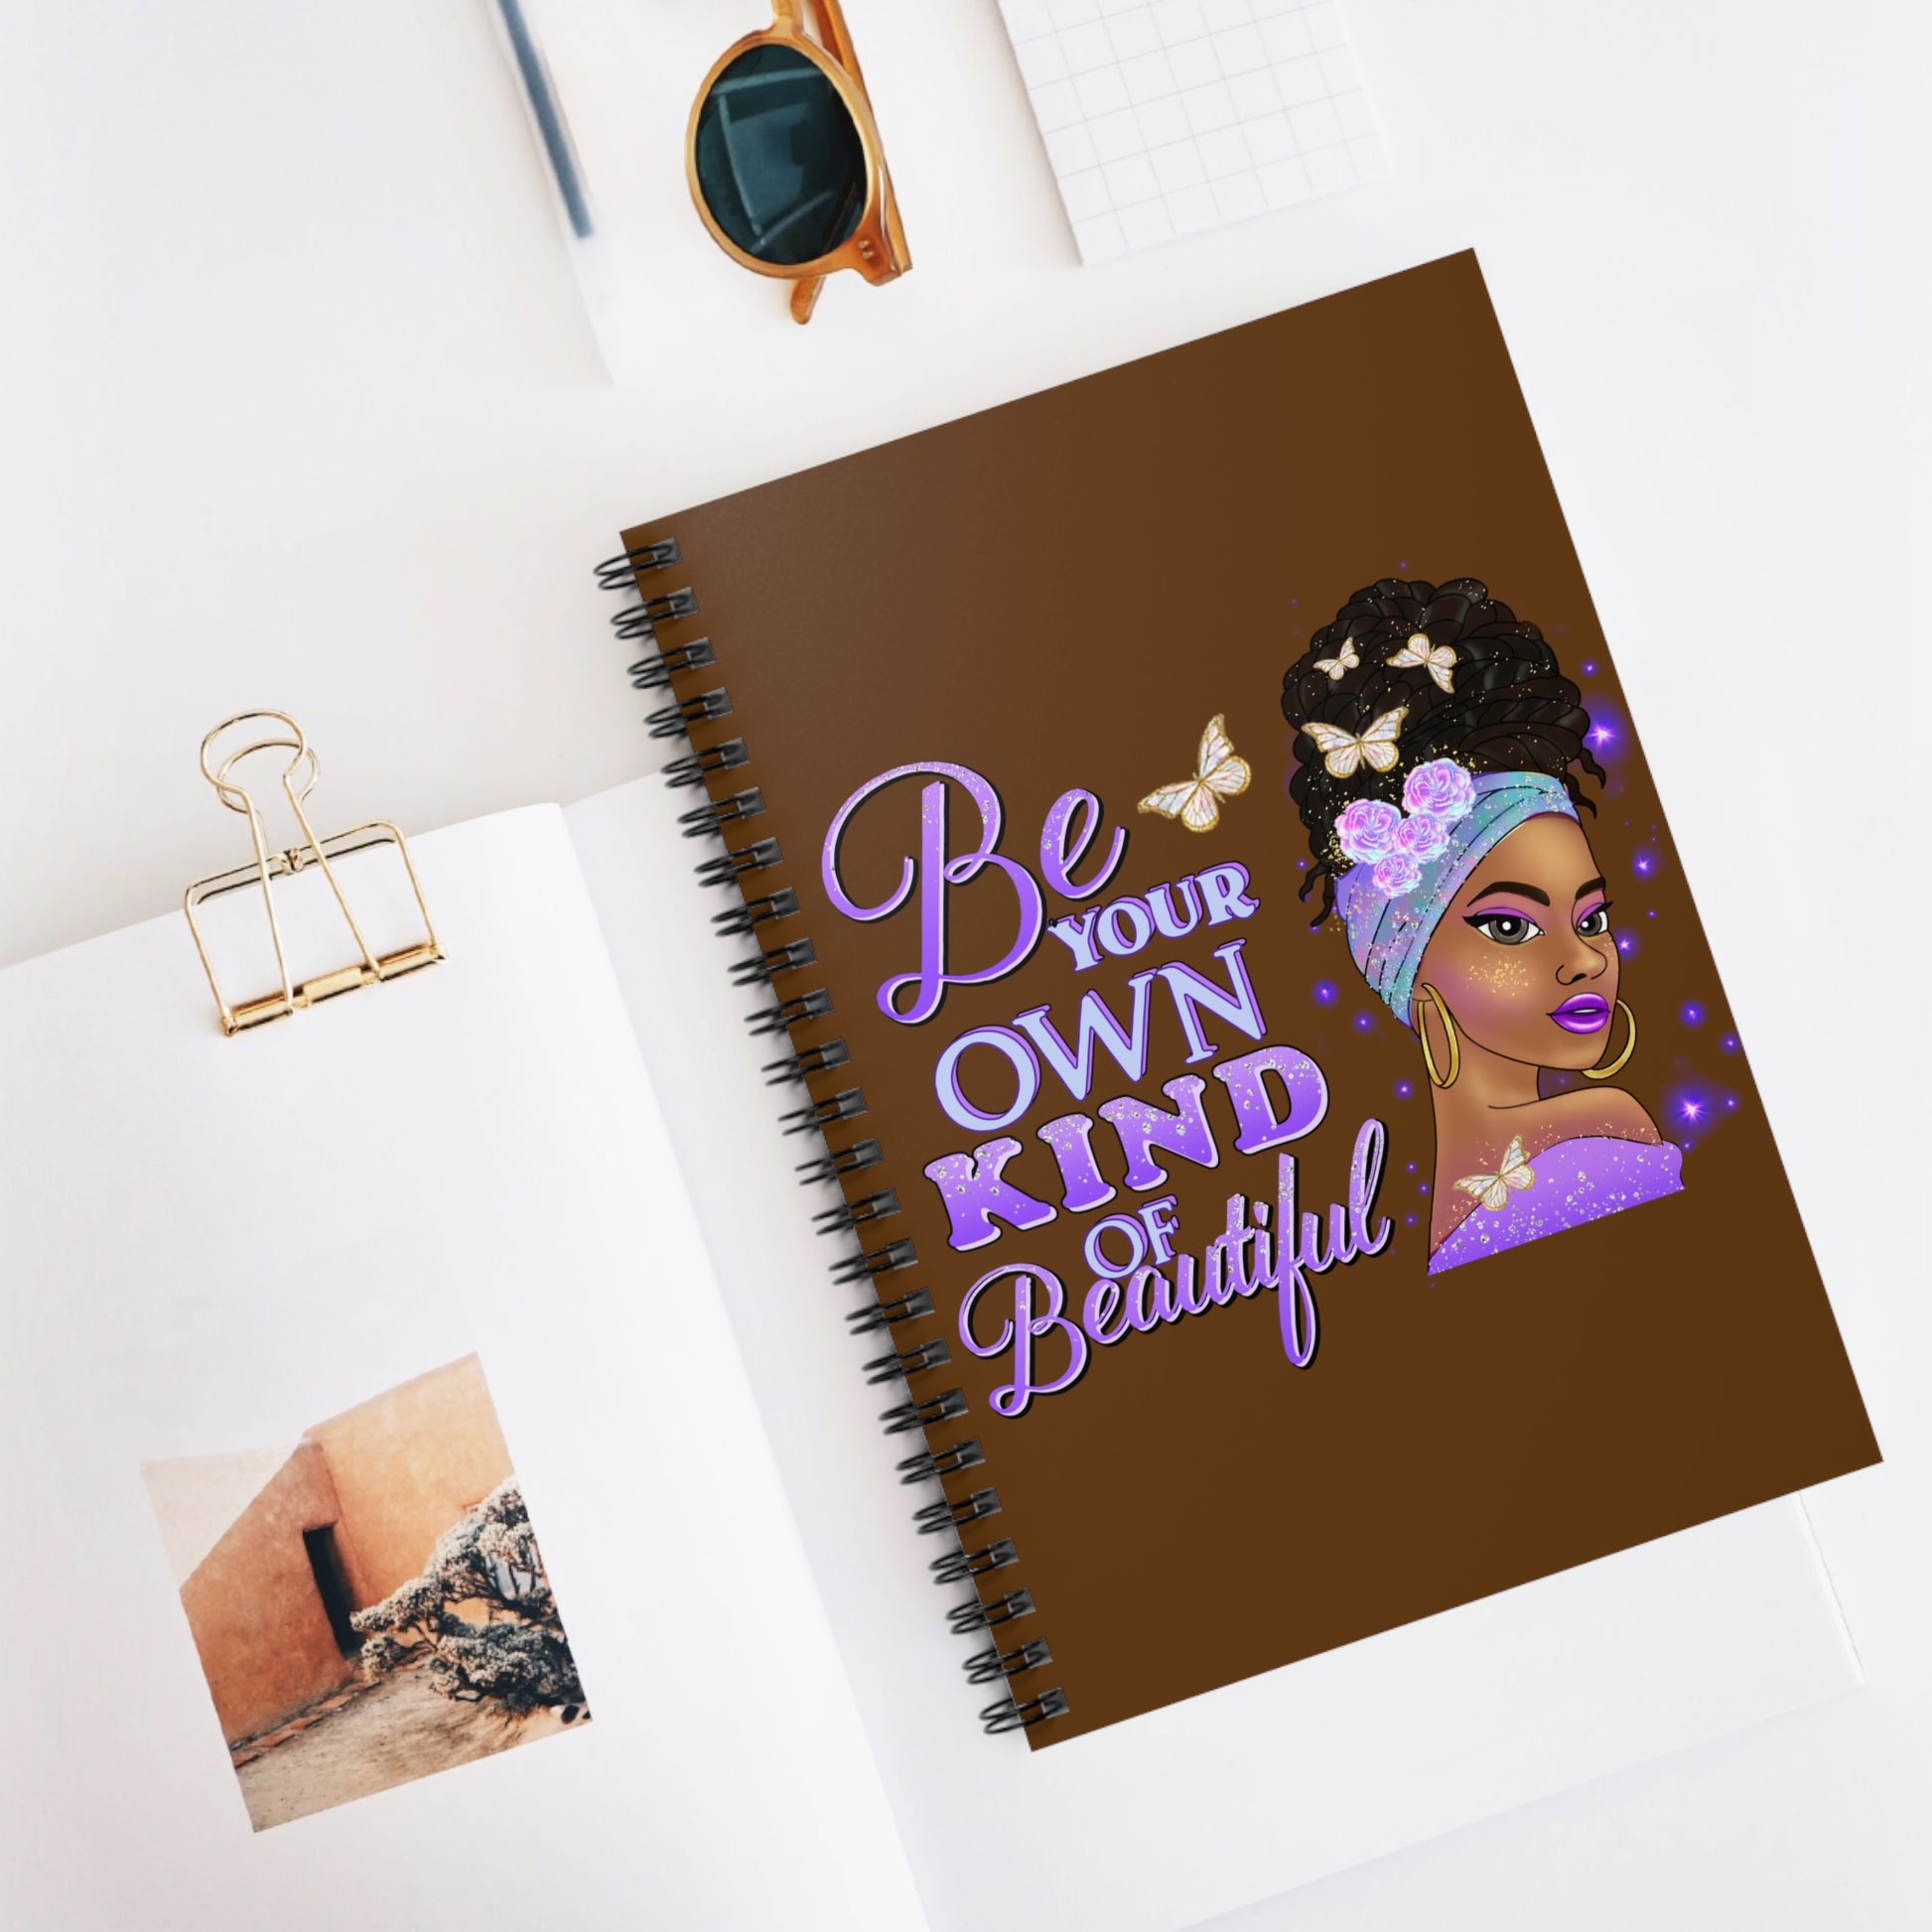 Own Kind of Beautiful: Spiral Notebook - Log Books - Journals - Diaries - and More Custom Printed by TheGlassyLass